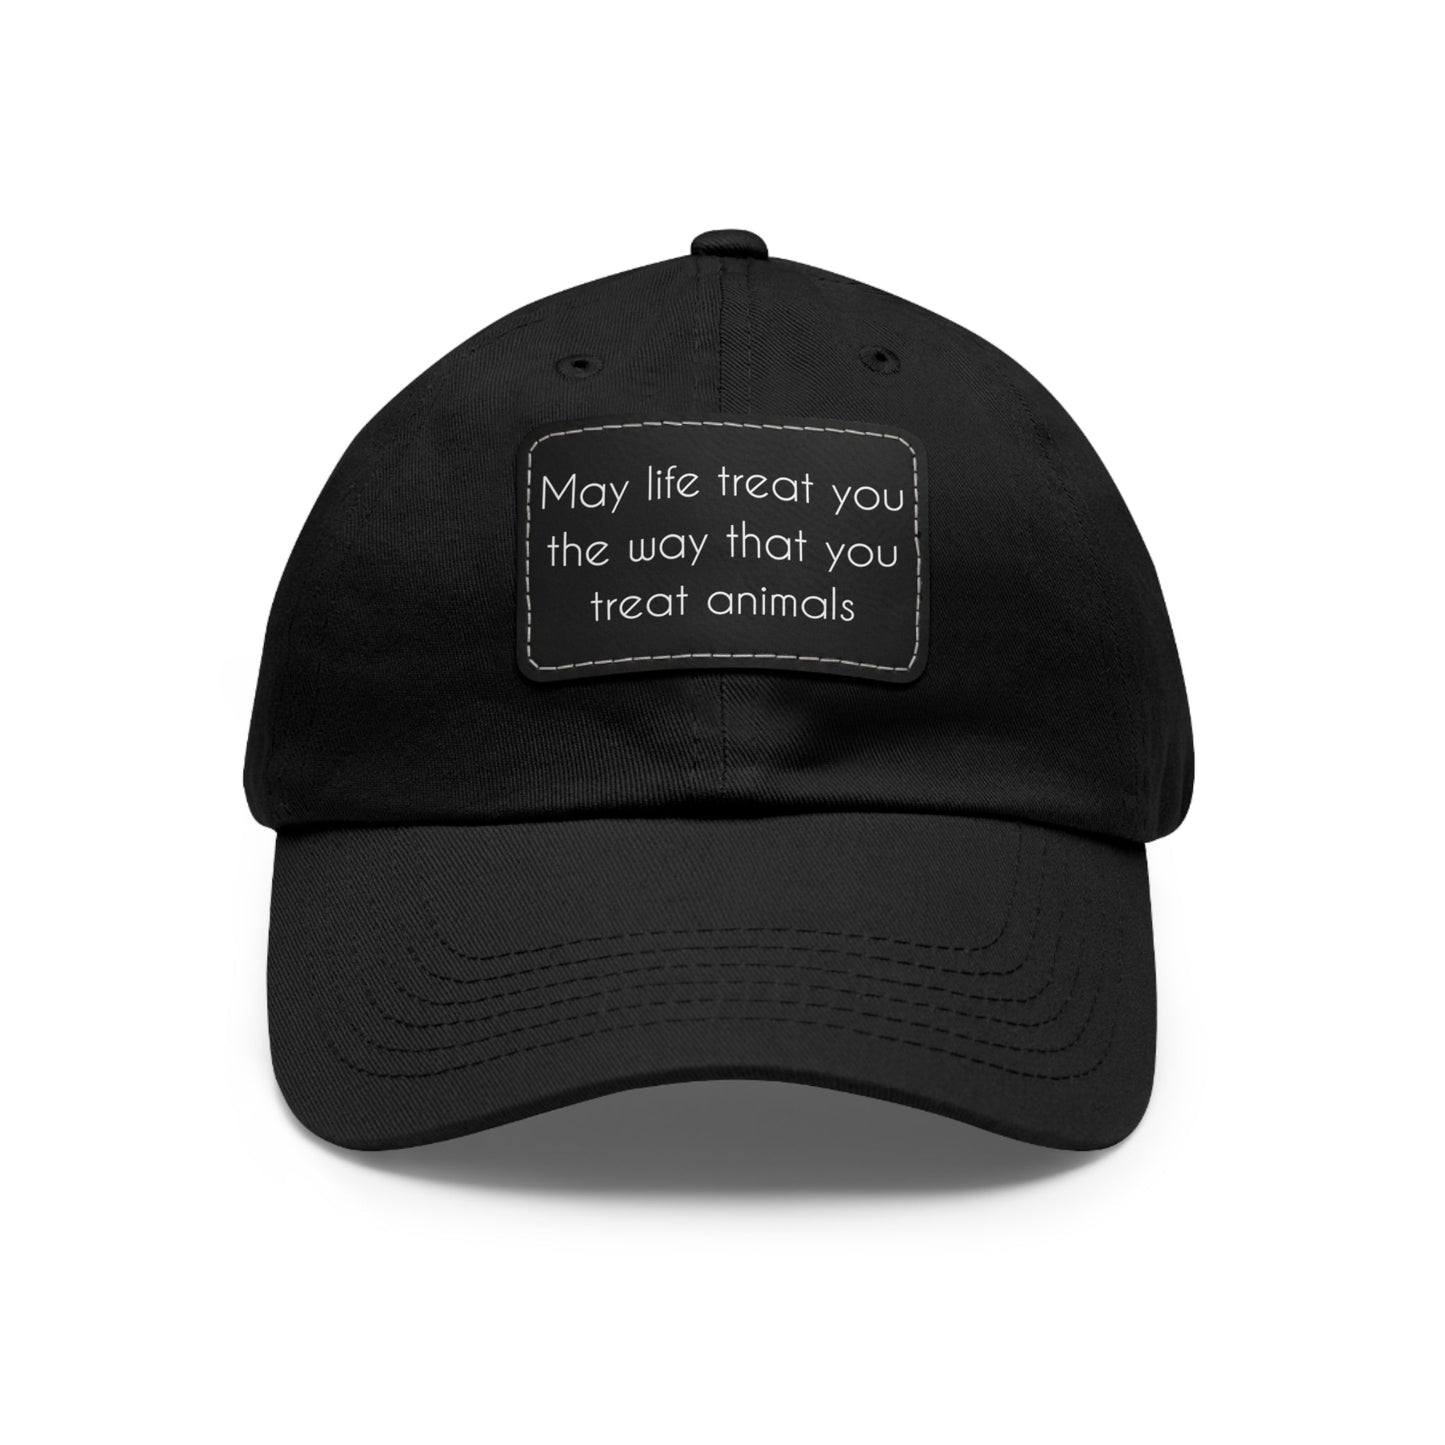 May Life Treat You The Way That You Treat Animals | Dad Hat - Detezi Designs-13685756020042608352